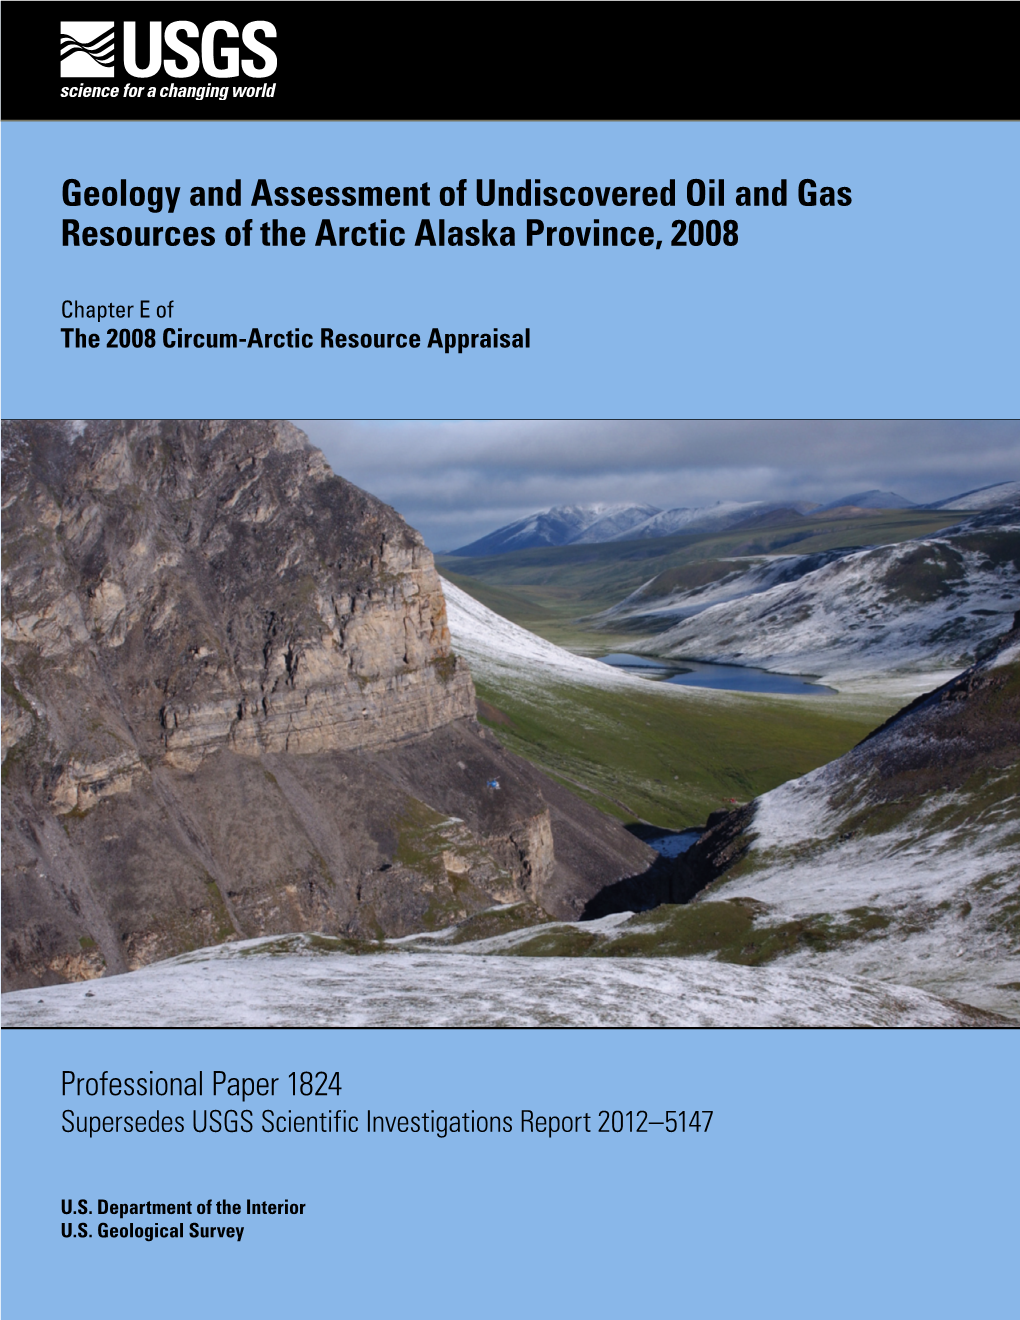 Geology and Assessment of Undiscovered Oil and Gas Resources of the Arctic Alaska Province, 2008